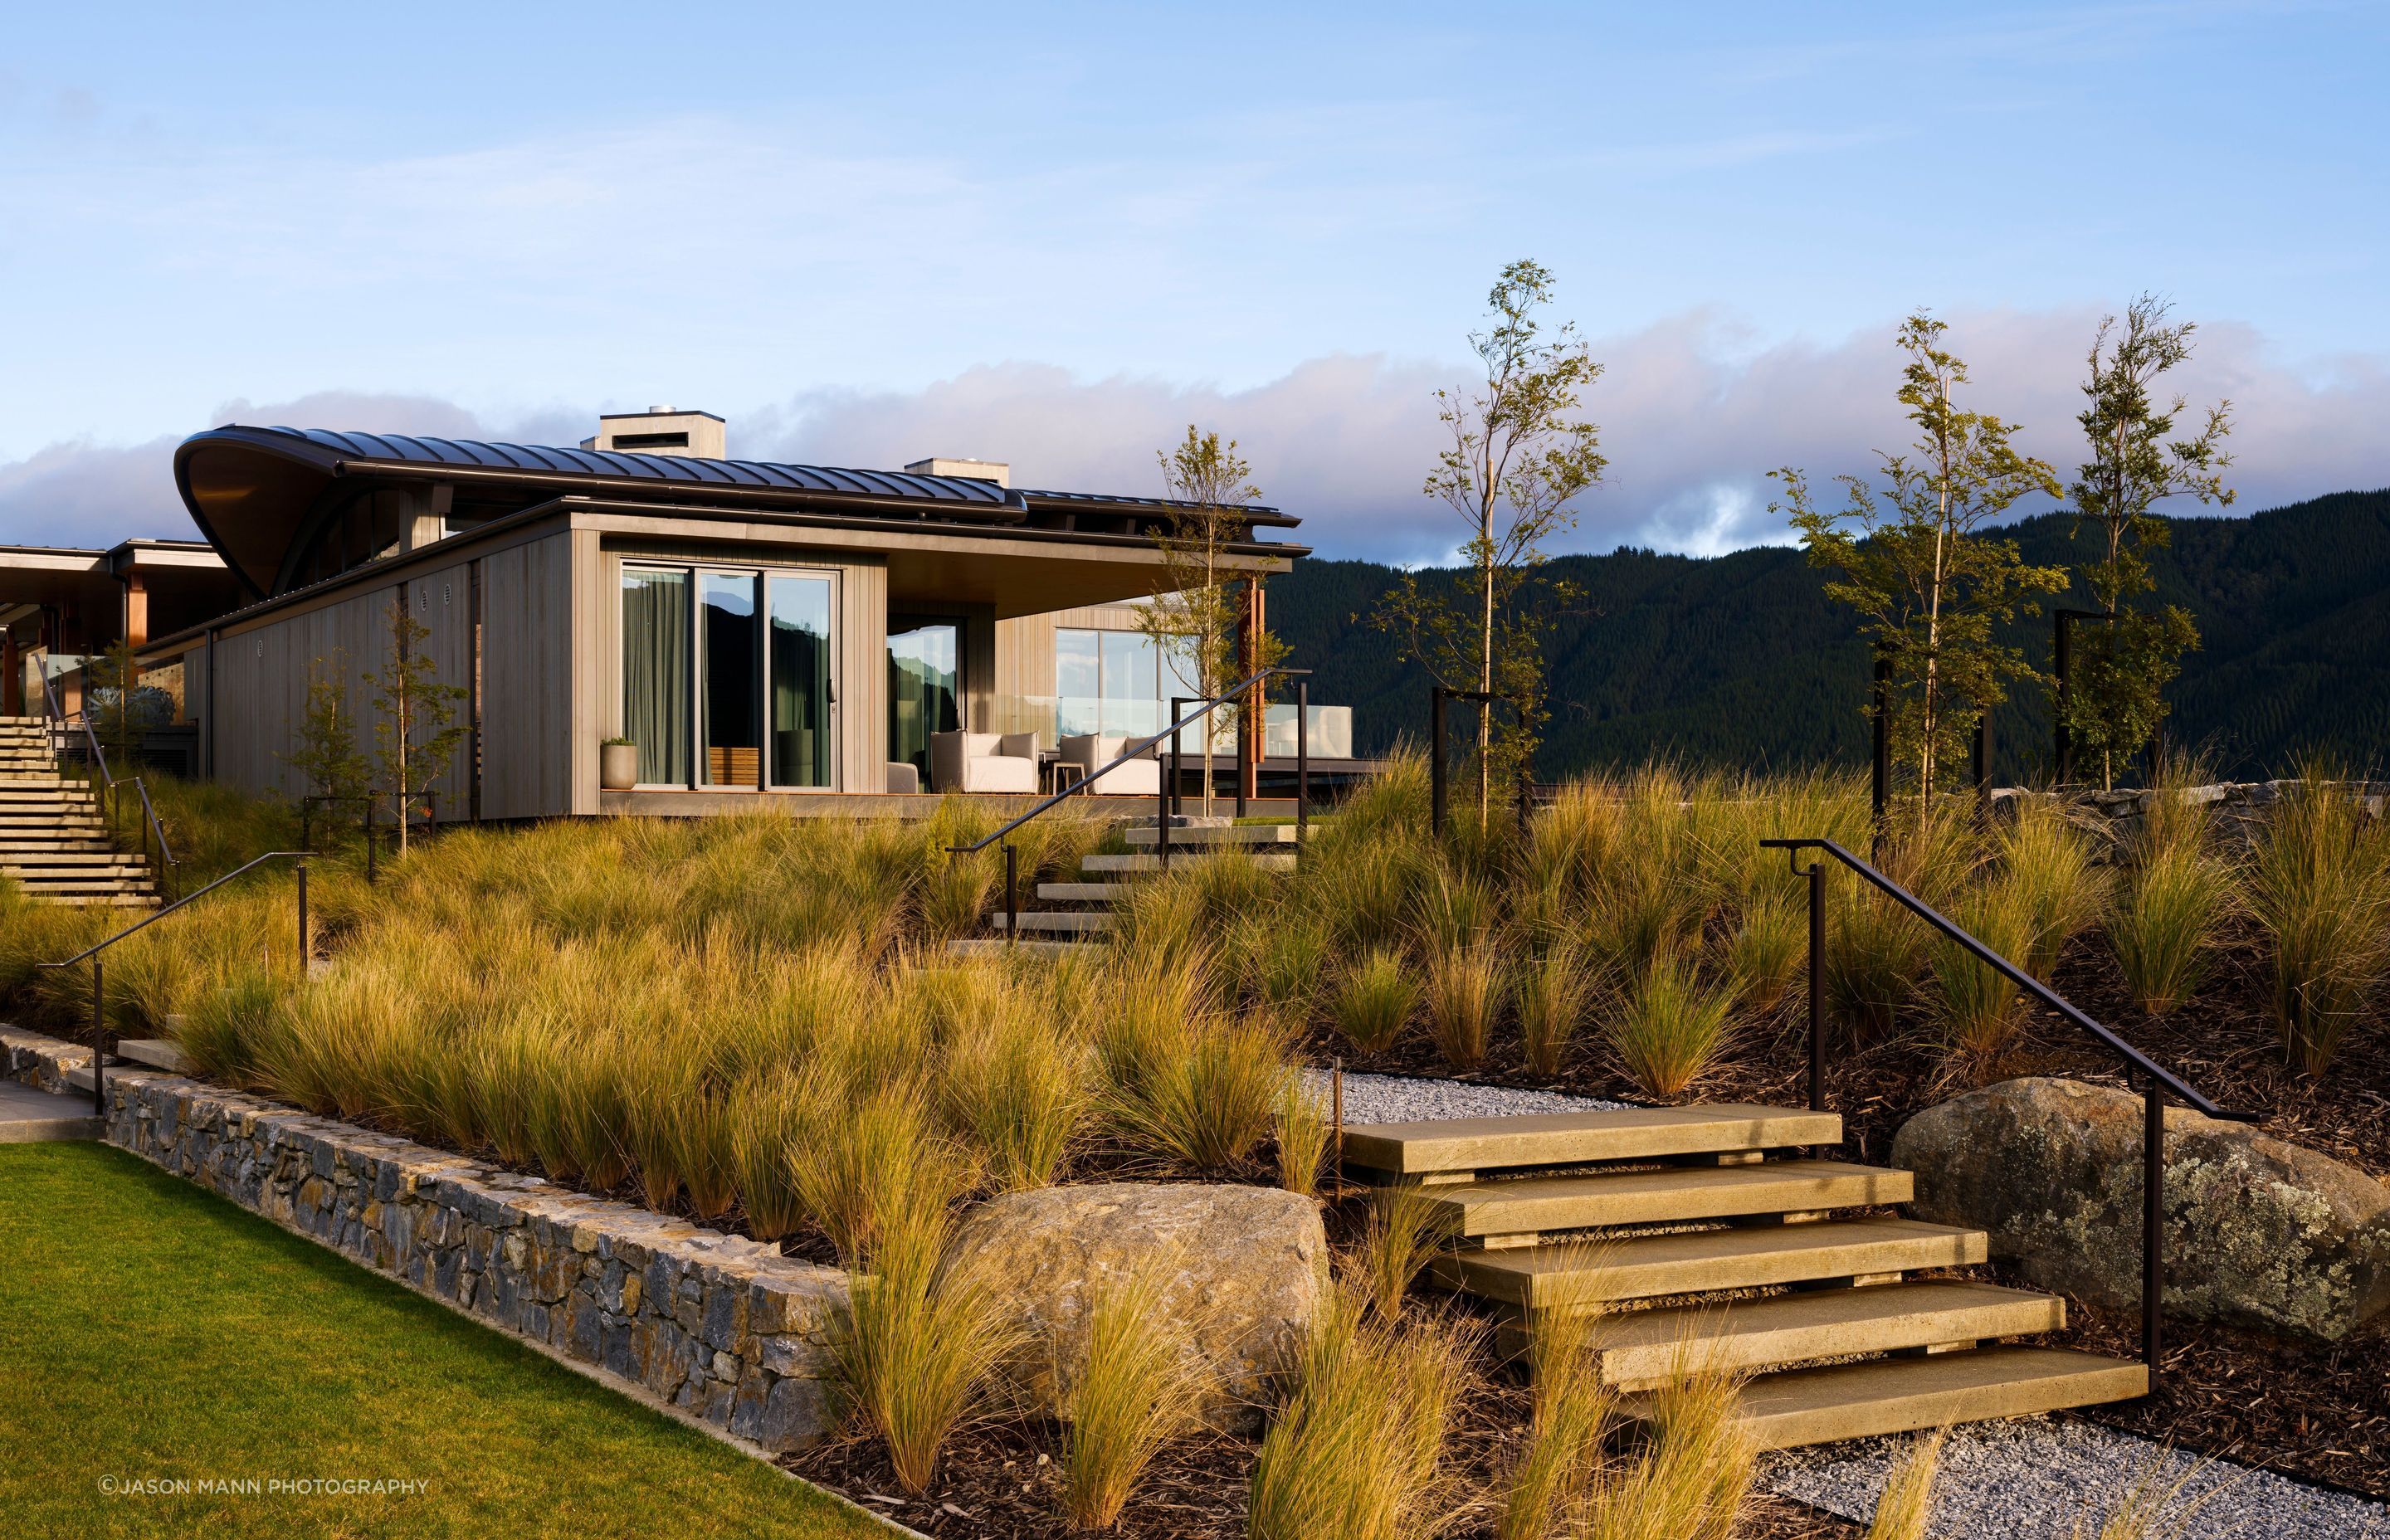 Due to the typology and elevation of the site, as well as the climate, the landscaping features a theme of regeneration with a palette of native New Zealand plants as the backdrop.